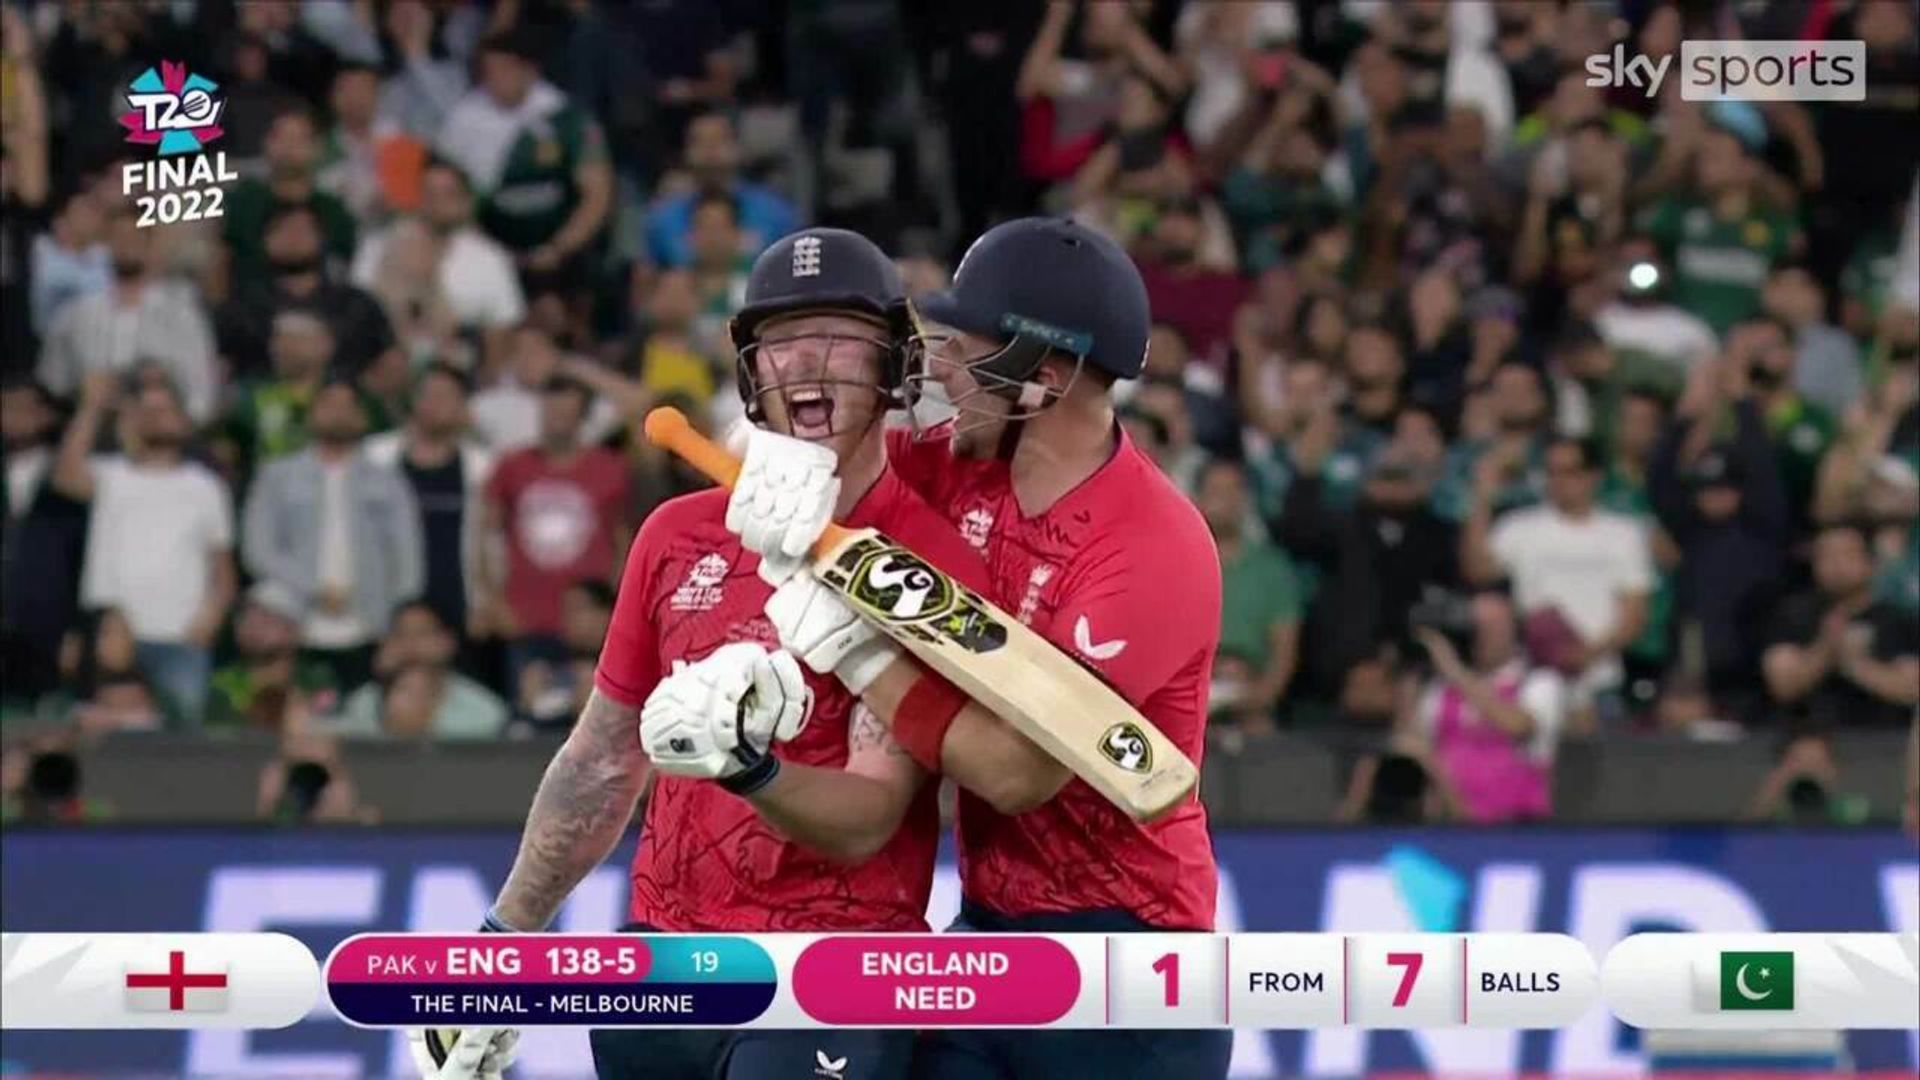 'It's Stokes, who else? - Moment England won T20 World Cup